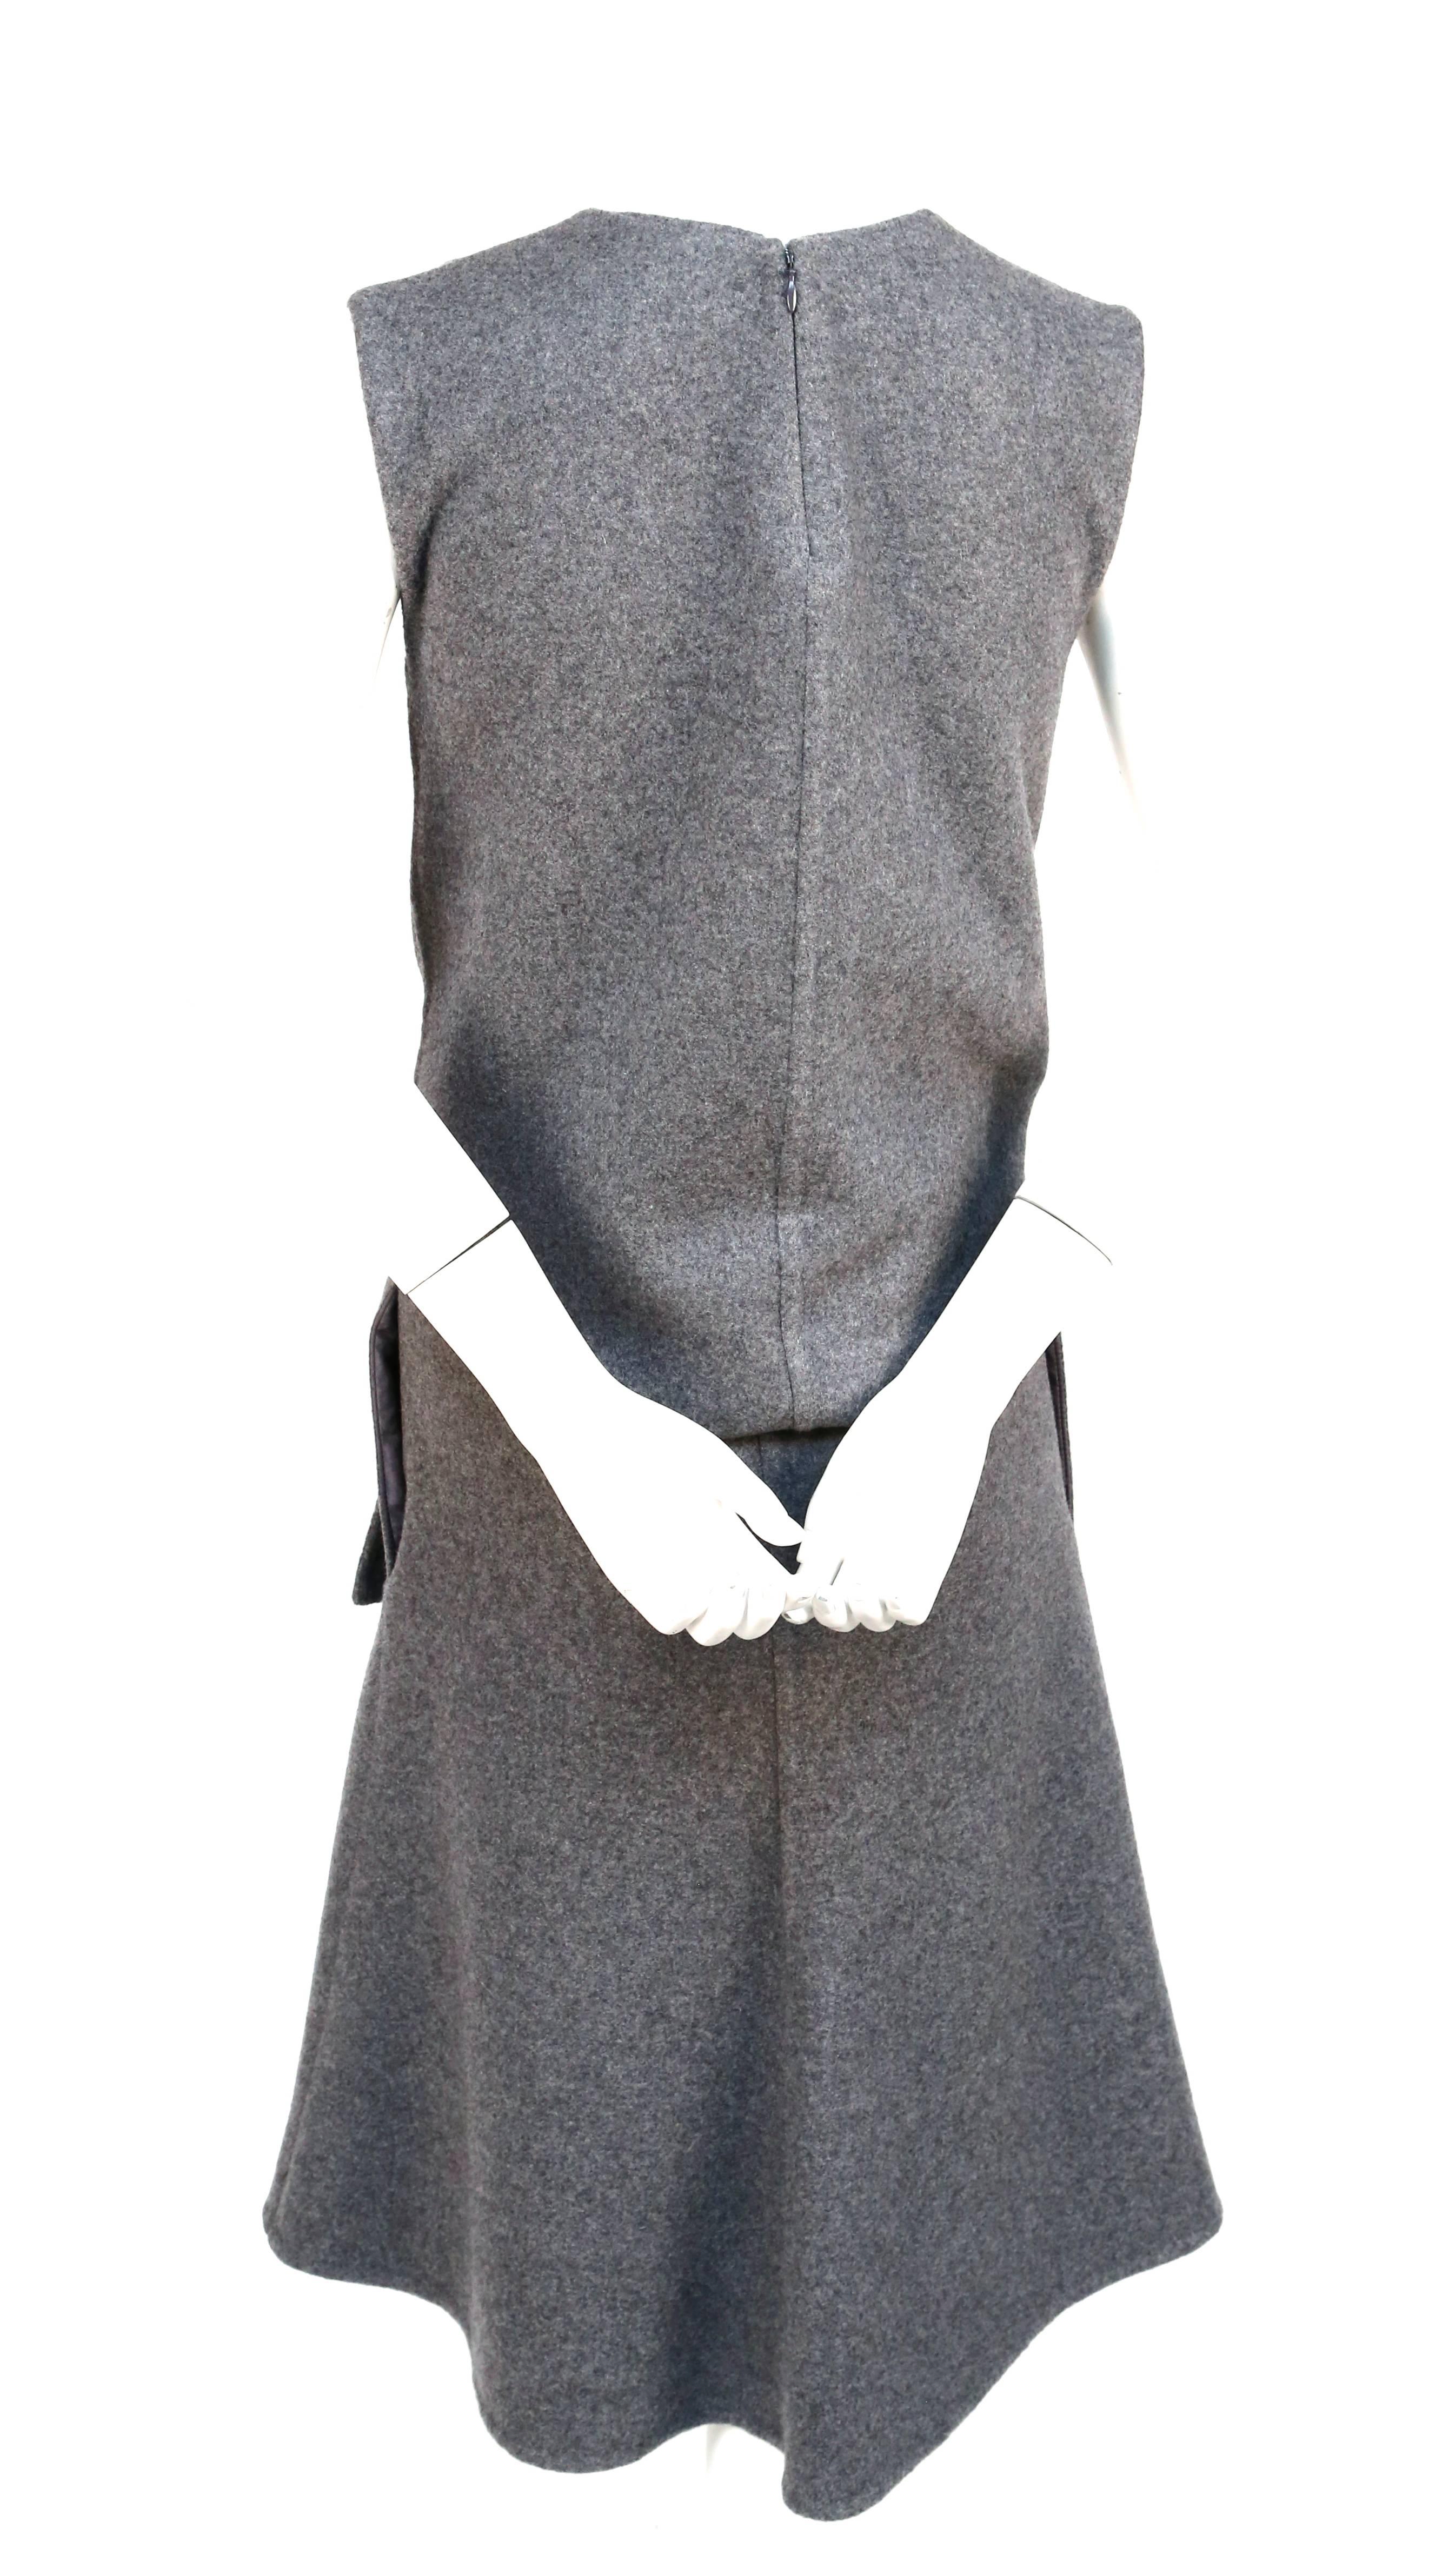 Women's unworn CELINE grey cashmere runway dress with knotted 'sleeves' - fall 2013